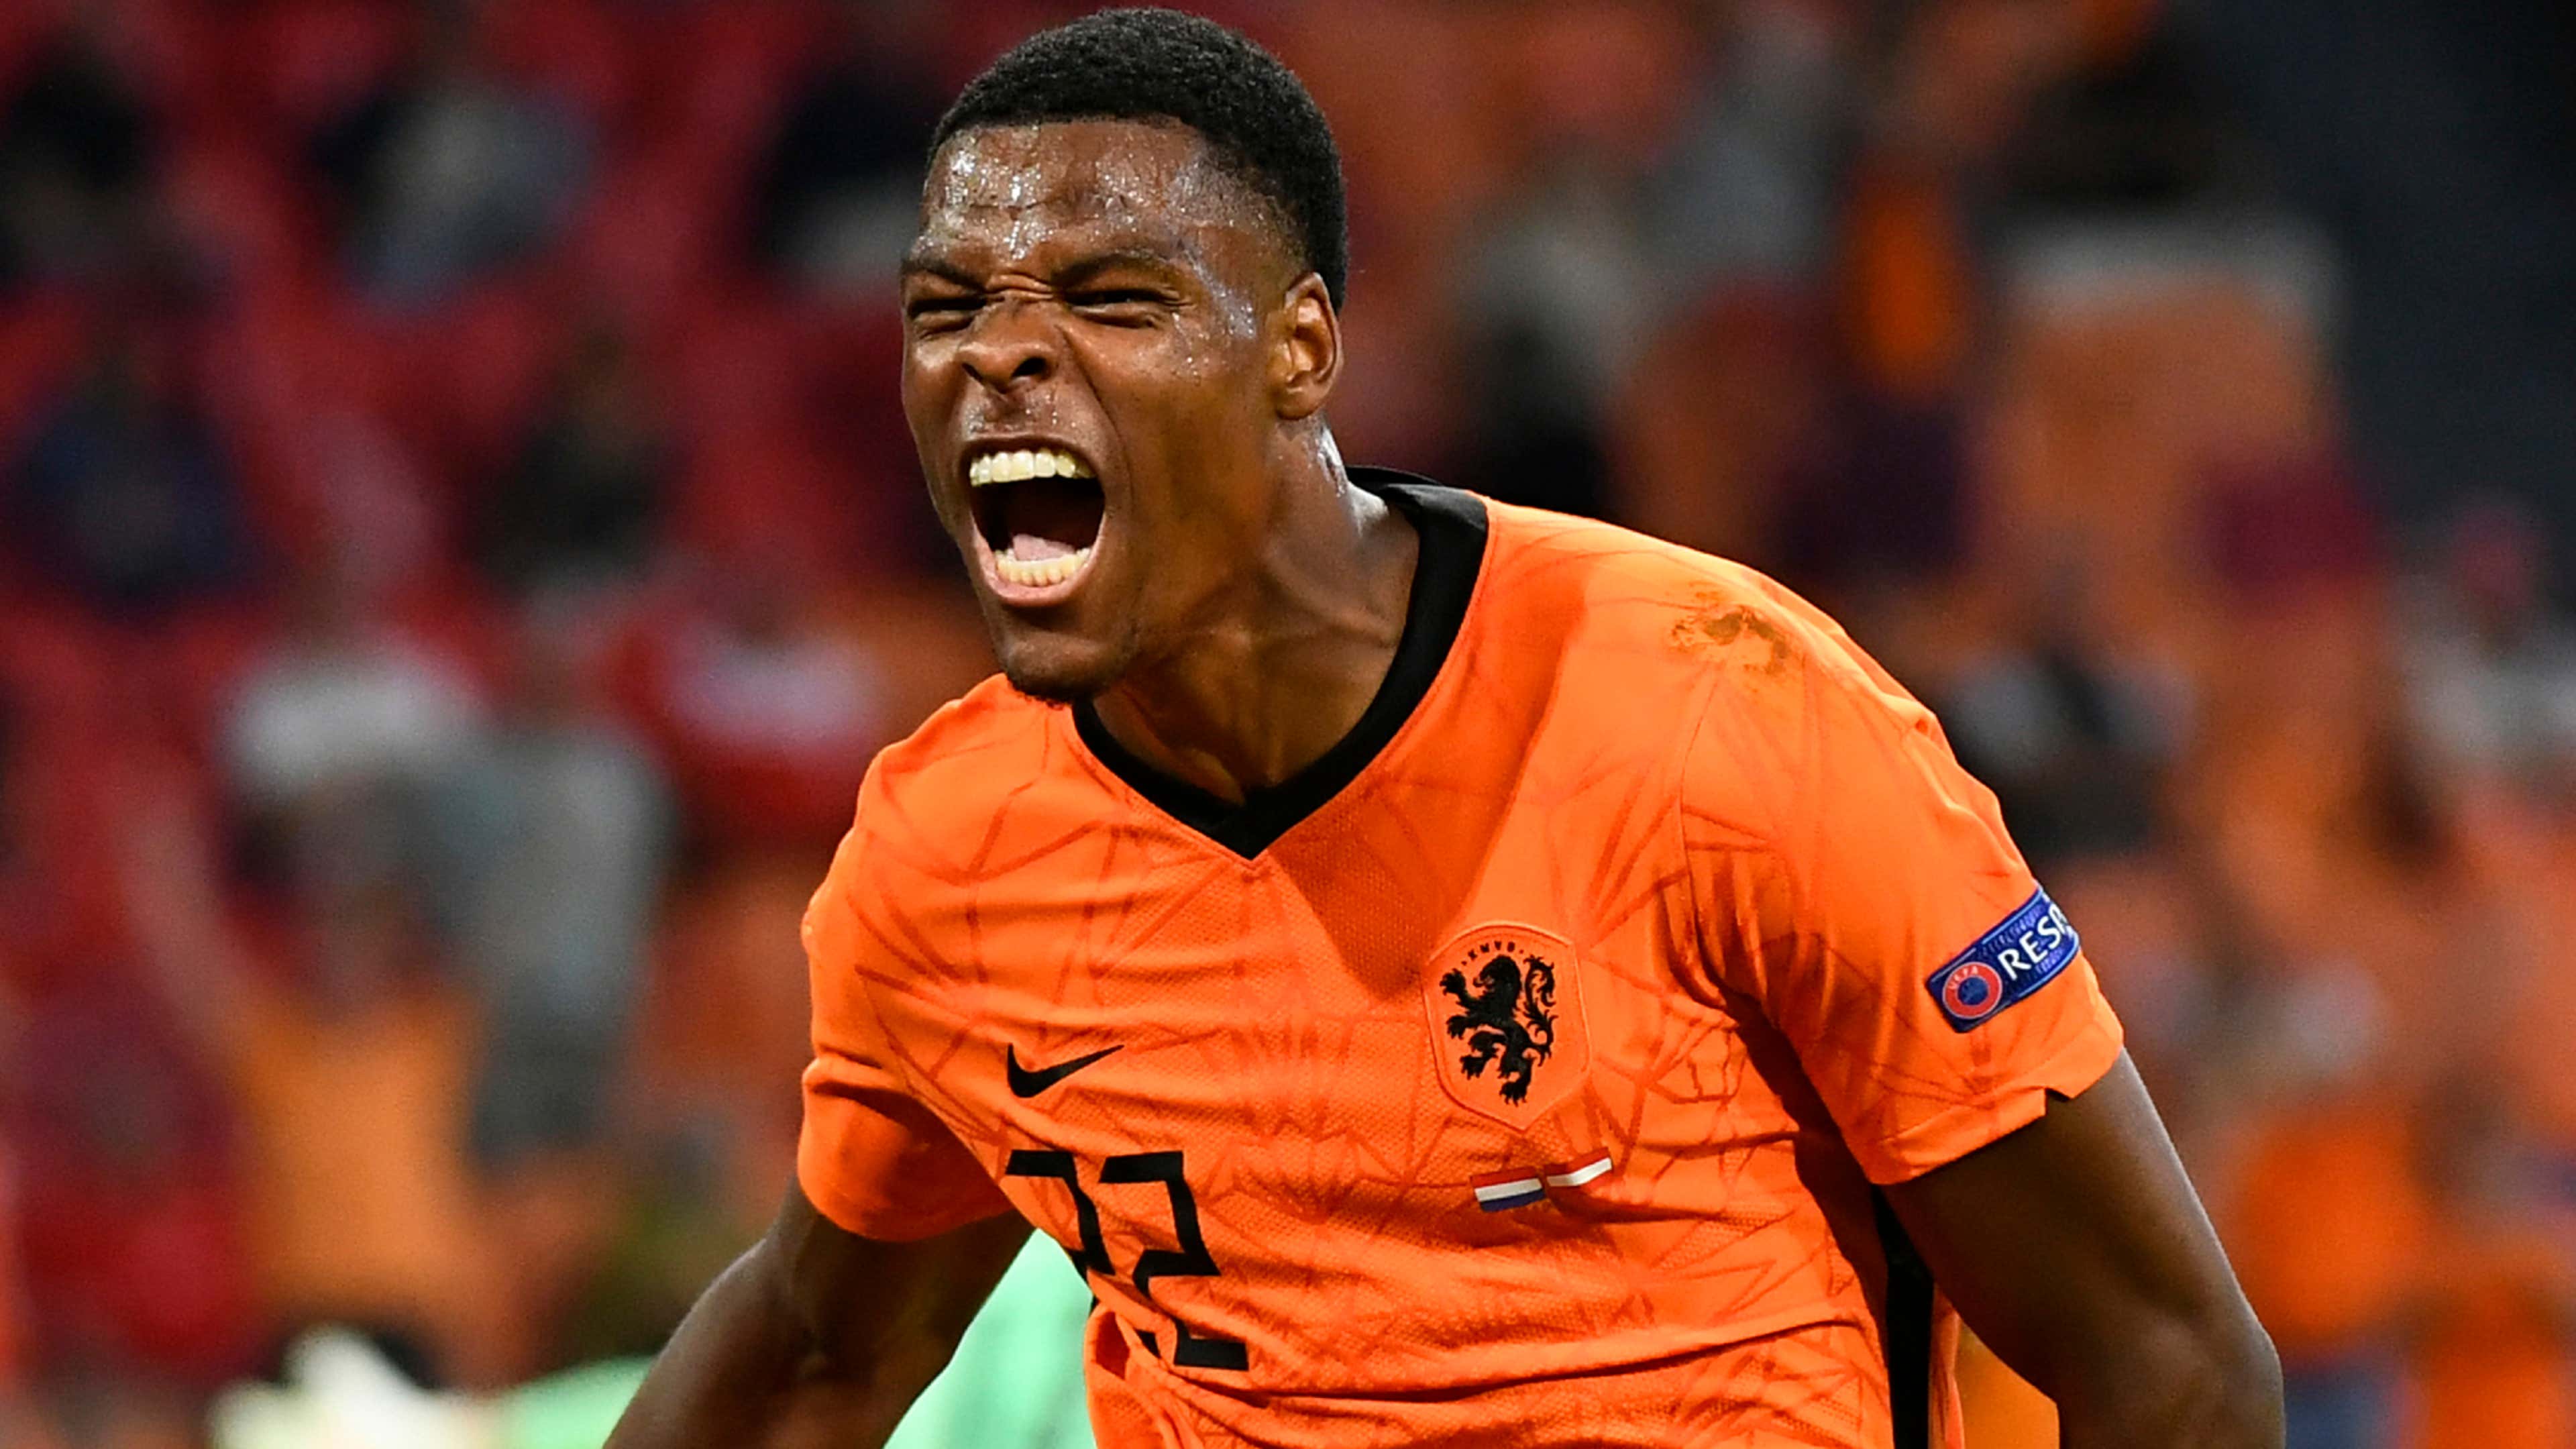 Euro 2020 features - Opinion: Chaotic beauty of this Dutch team is